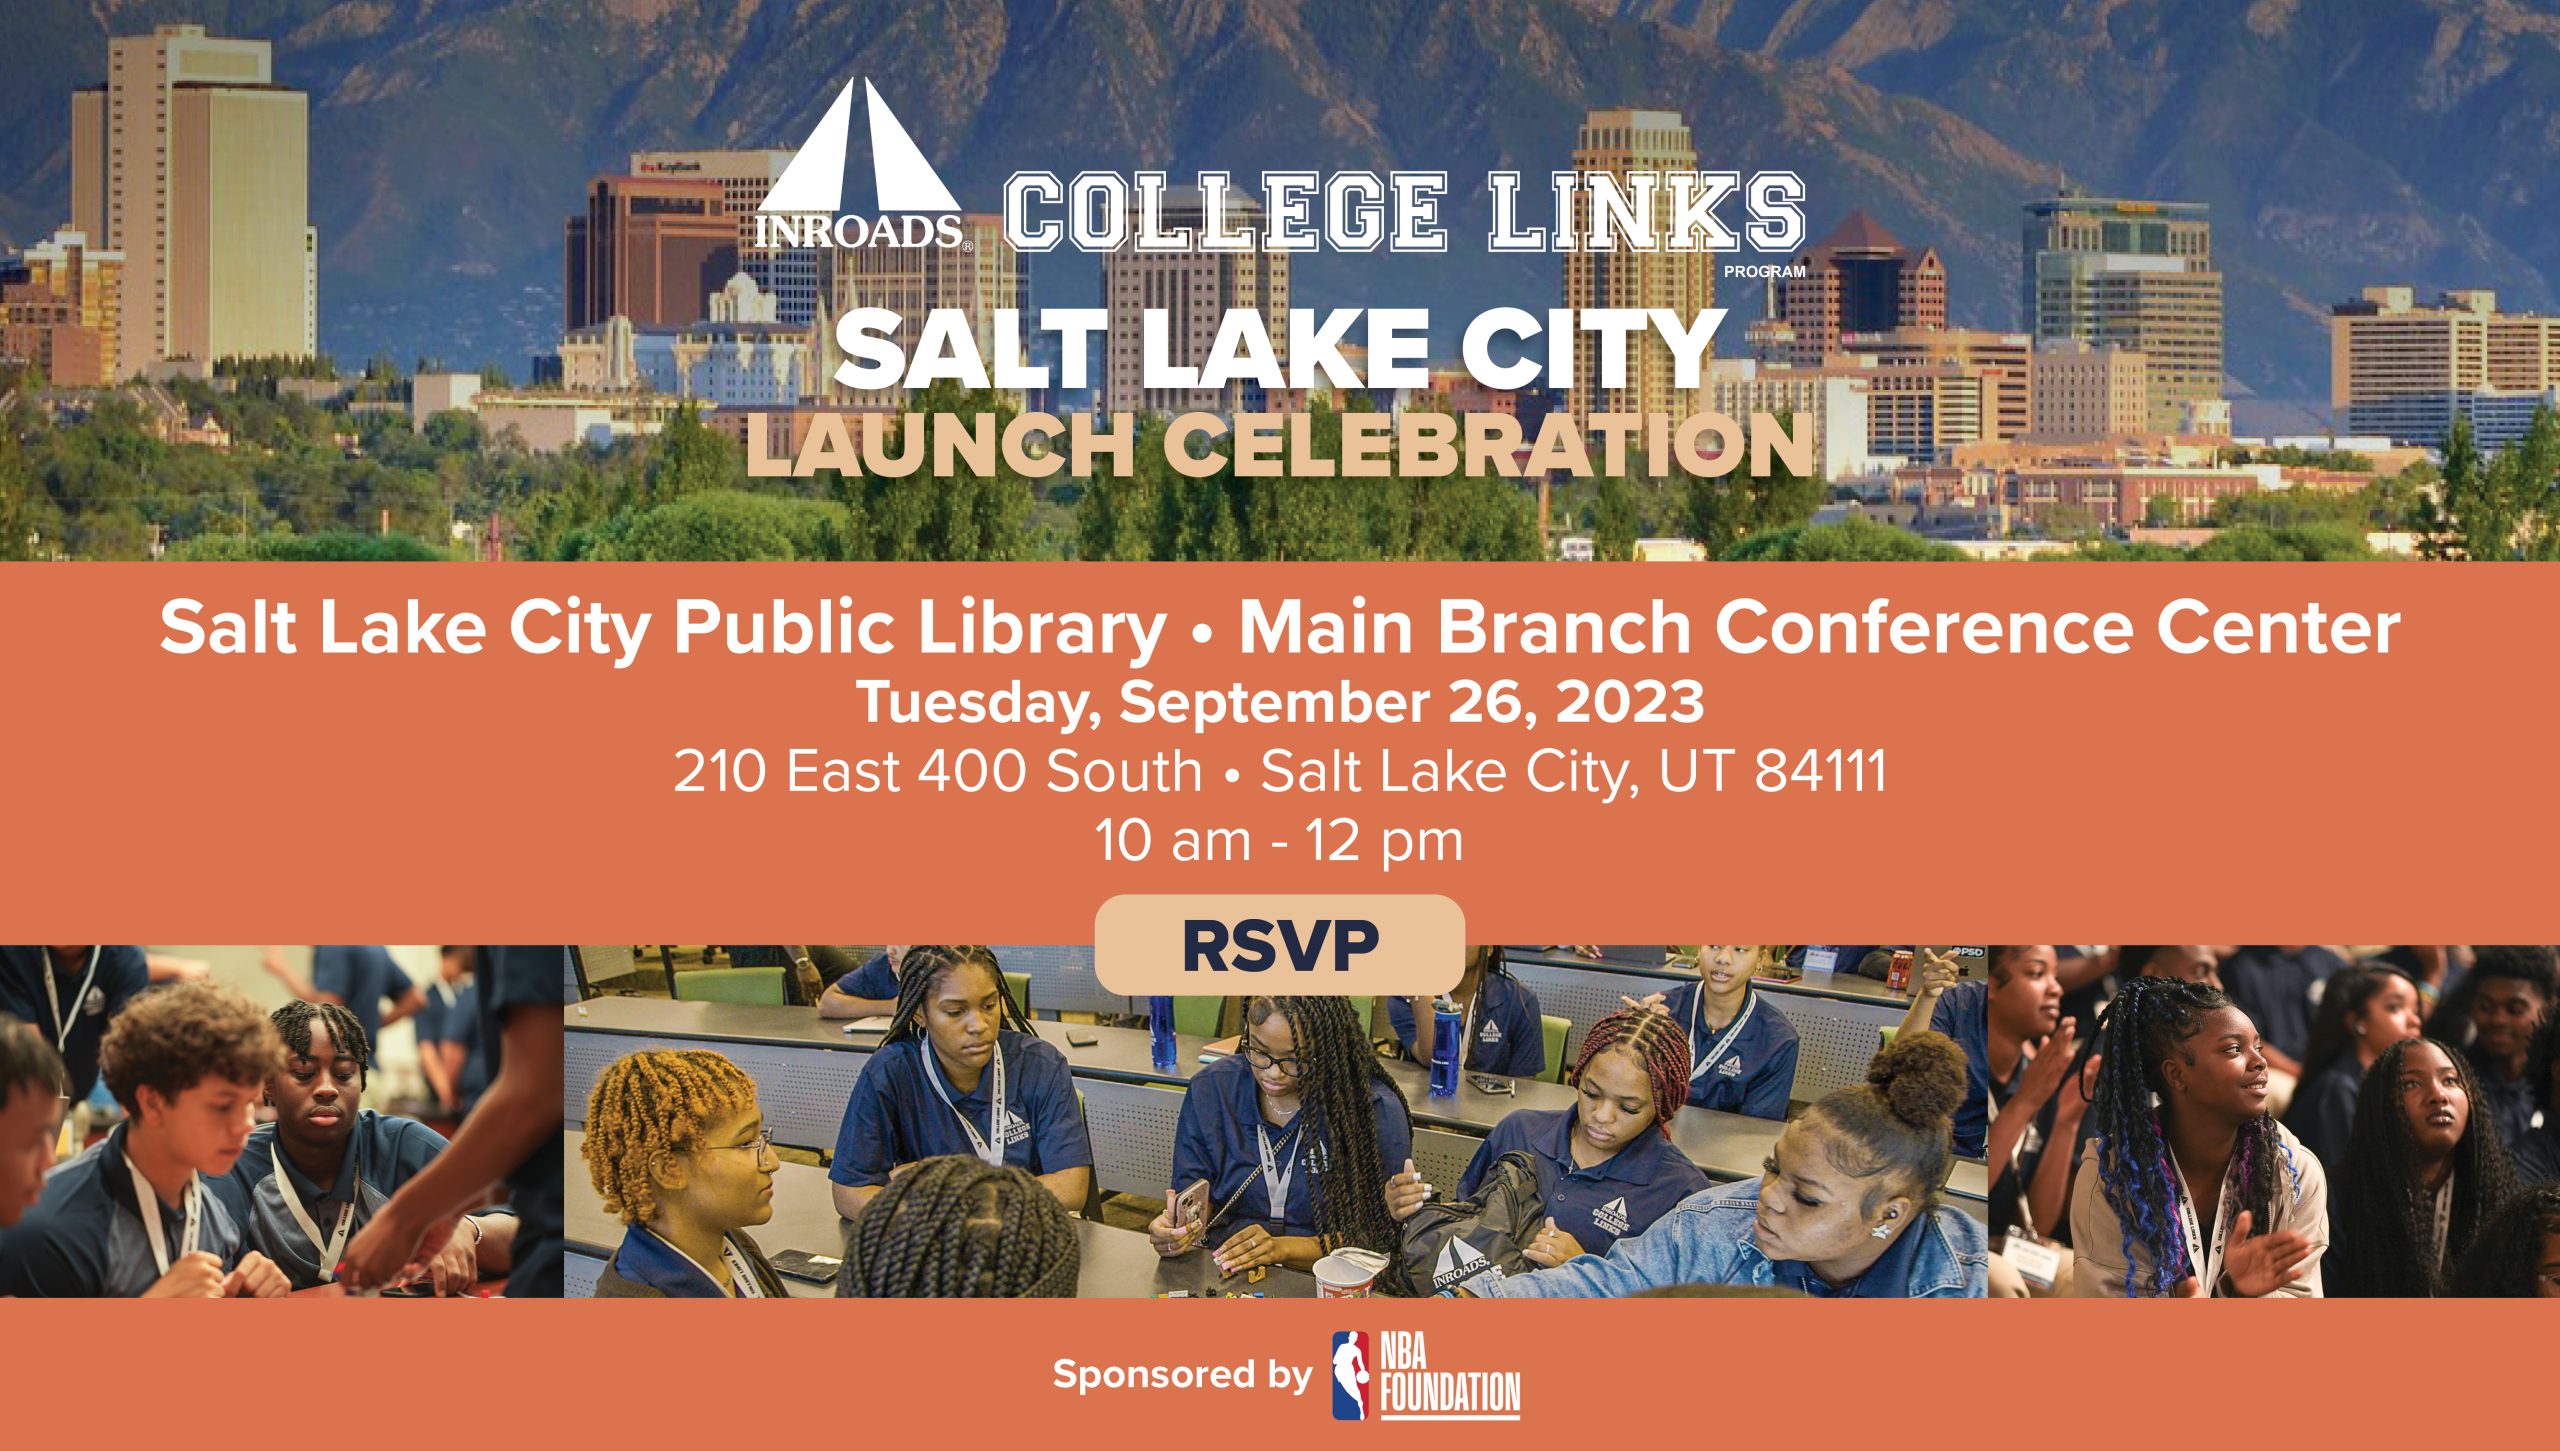 Featured image for “Dynamic Partnership Breaks Barriers for Underserved Salt Lake City Students Providing Path to Leadership”